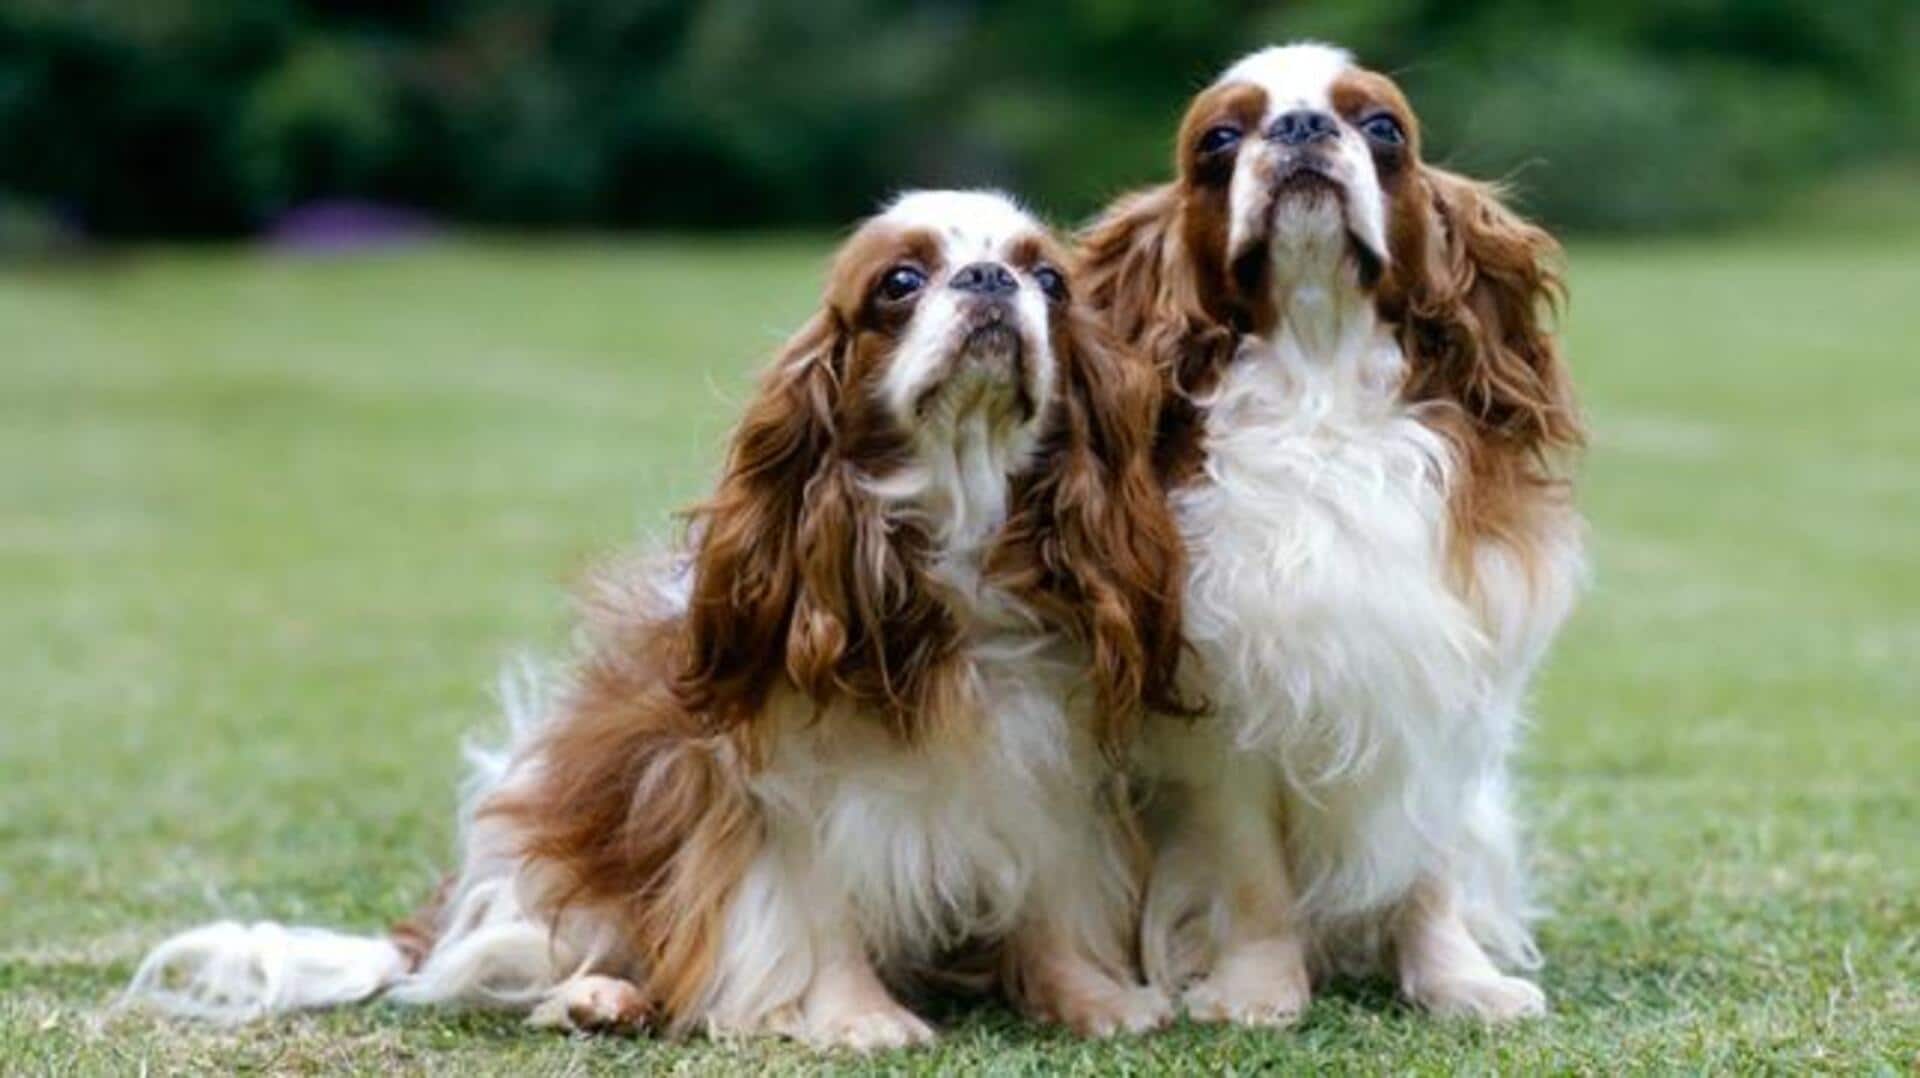 English Toy Spaniel dog care: Follow these tips